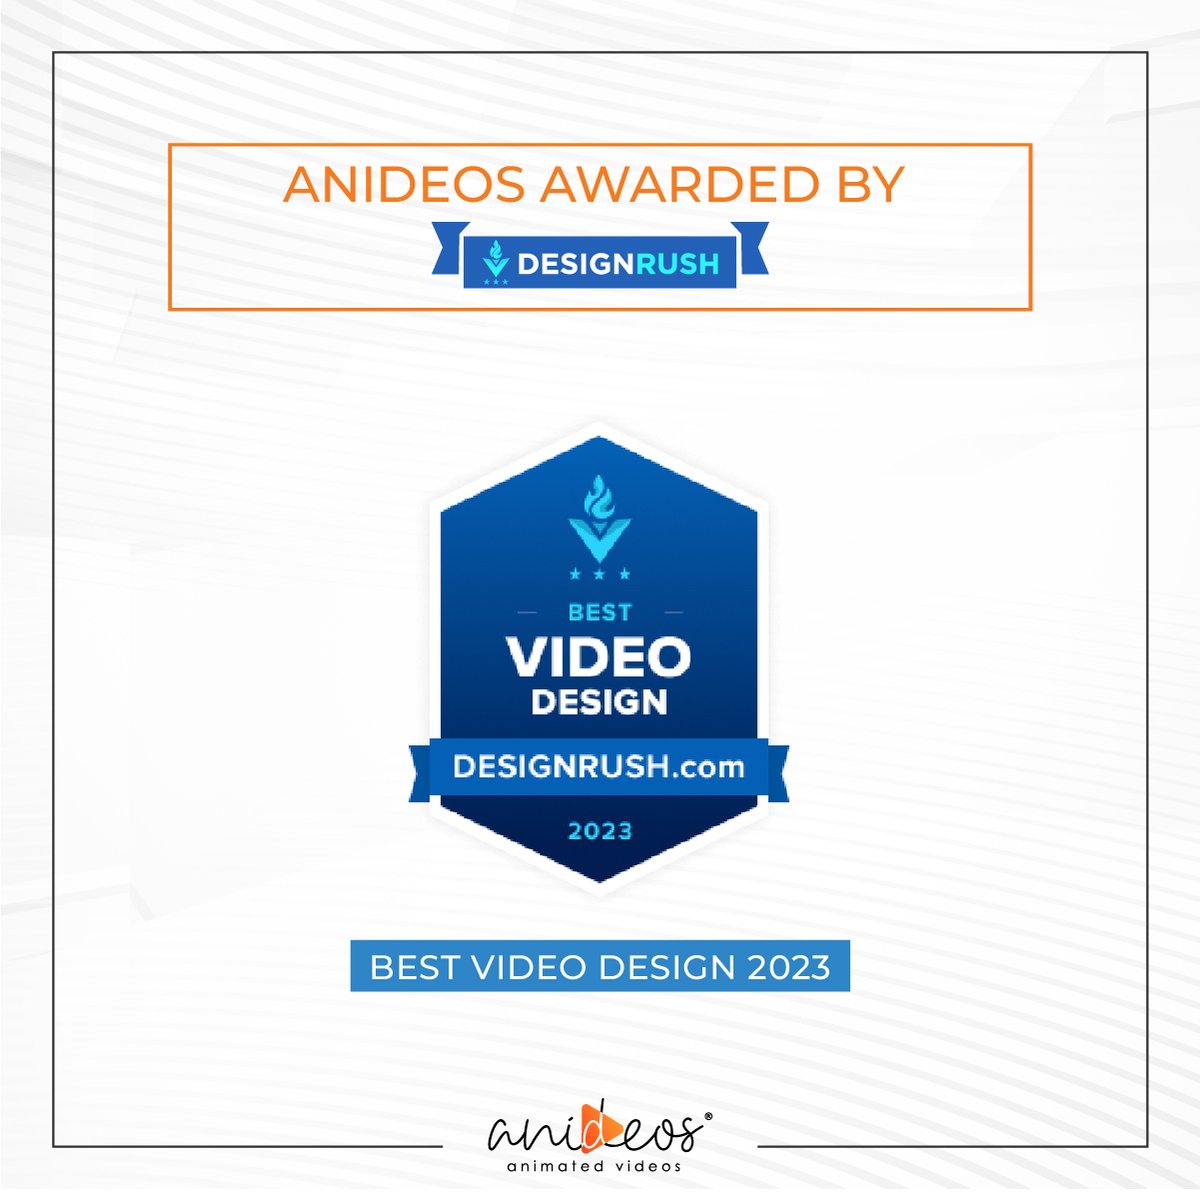 Anideos has recently been awarded ‘Best Video Design’ by DesignRush due to our acclaimed Lion NFT 3D Promotional Video, which is roaring in the digital realm.

#anideos #animation #designrush #nft #lion #award #videodesign #digitalart